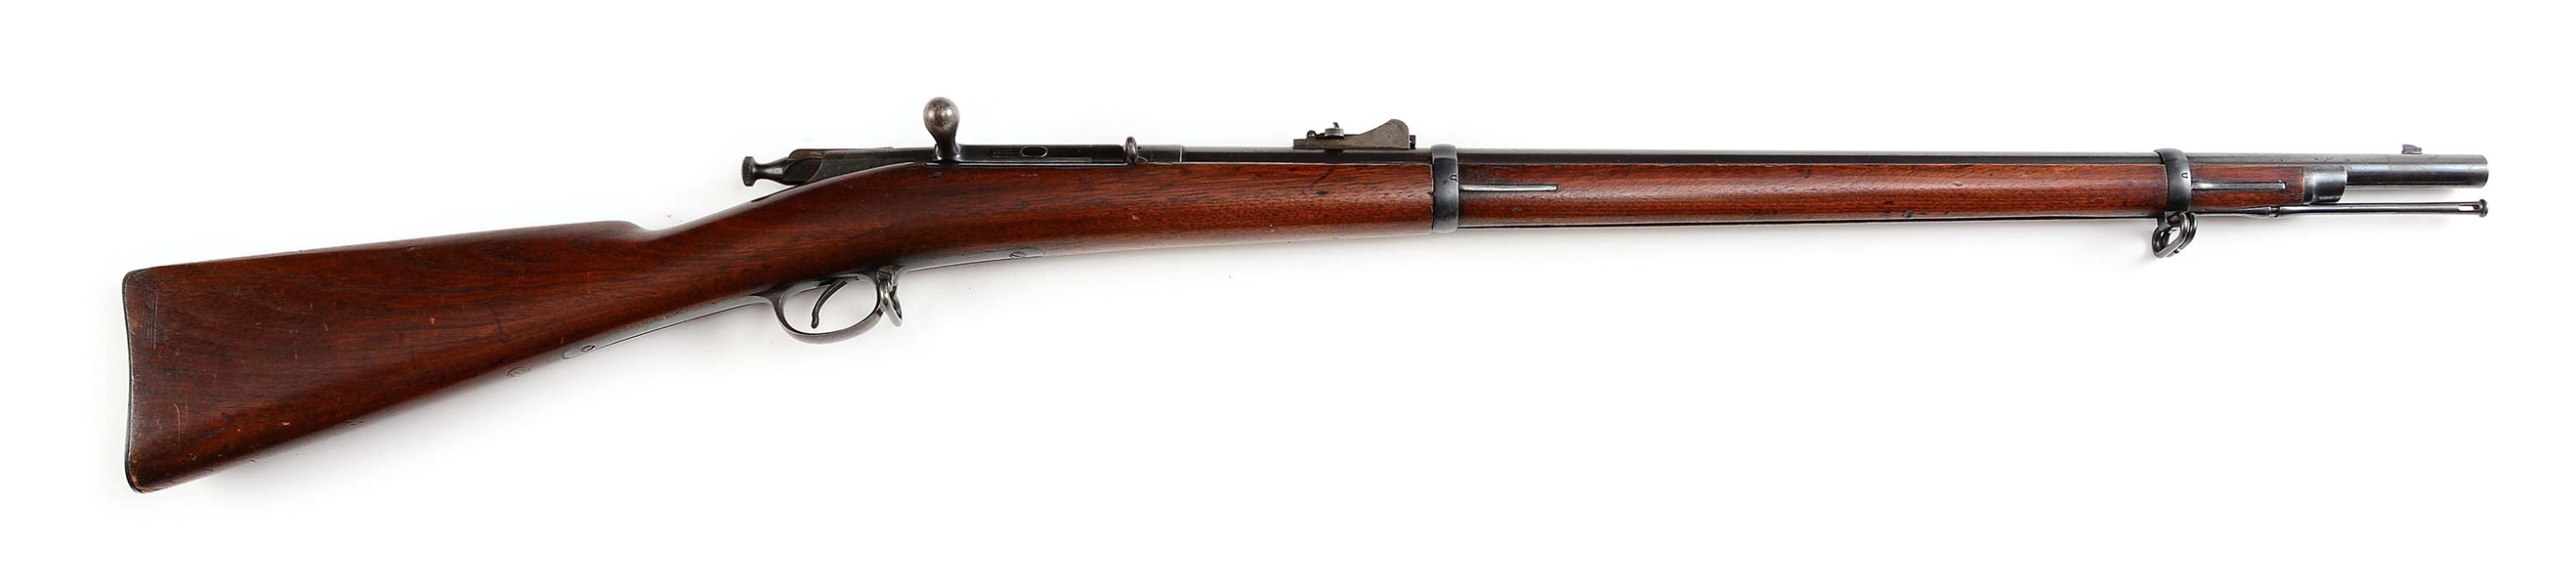 (A) RARE & DESIRABLE SPRINGFIELD CHAFFEE-REESE MODEL 1882 RIFLE DATED 1884.